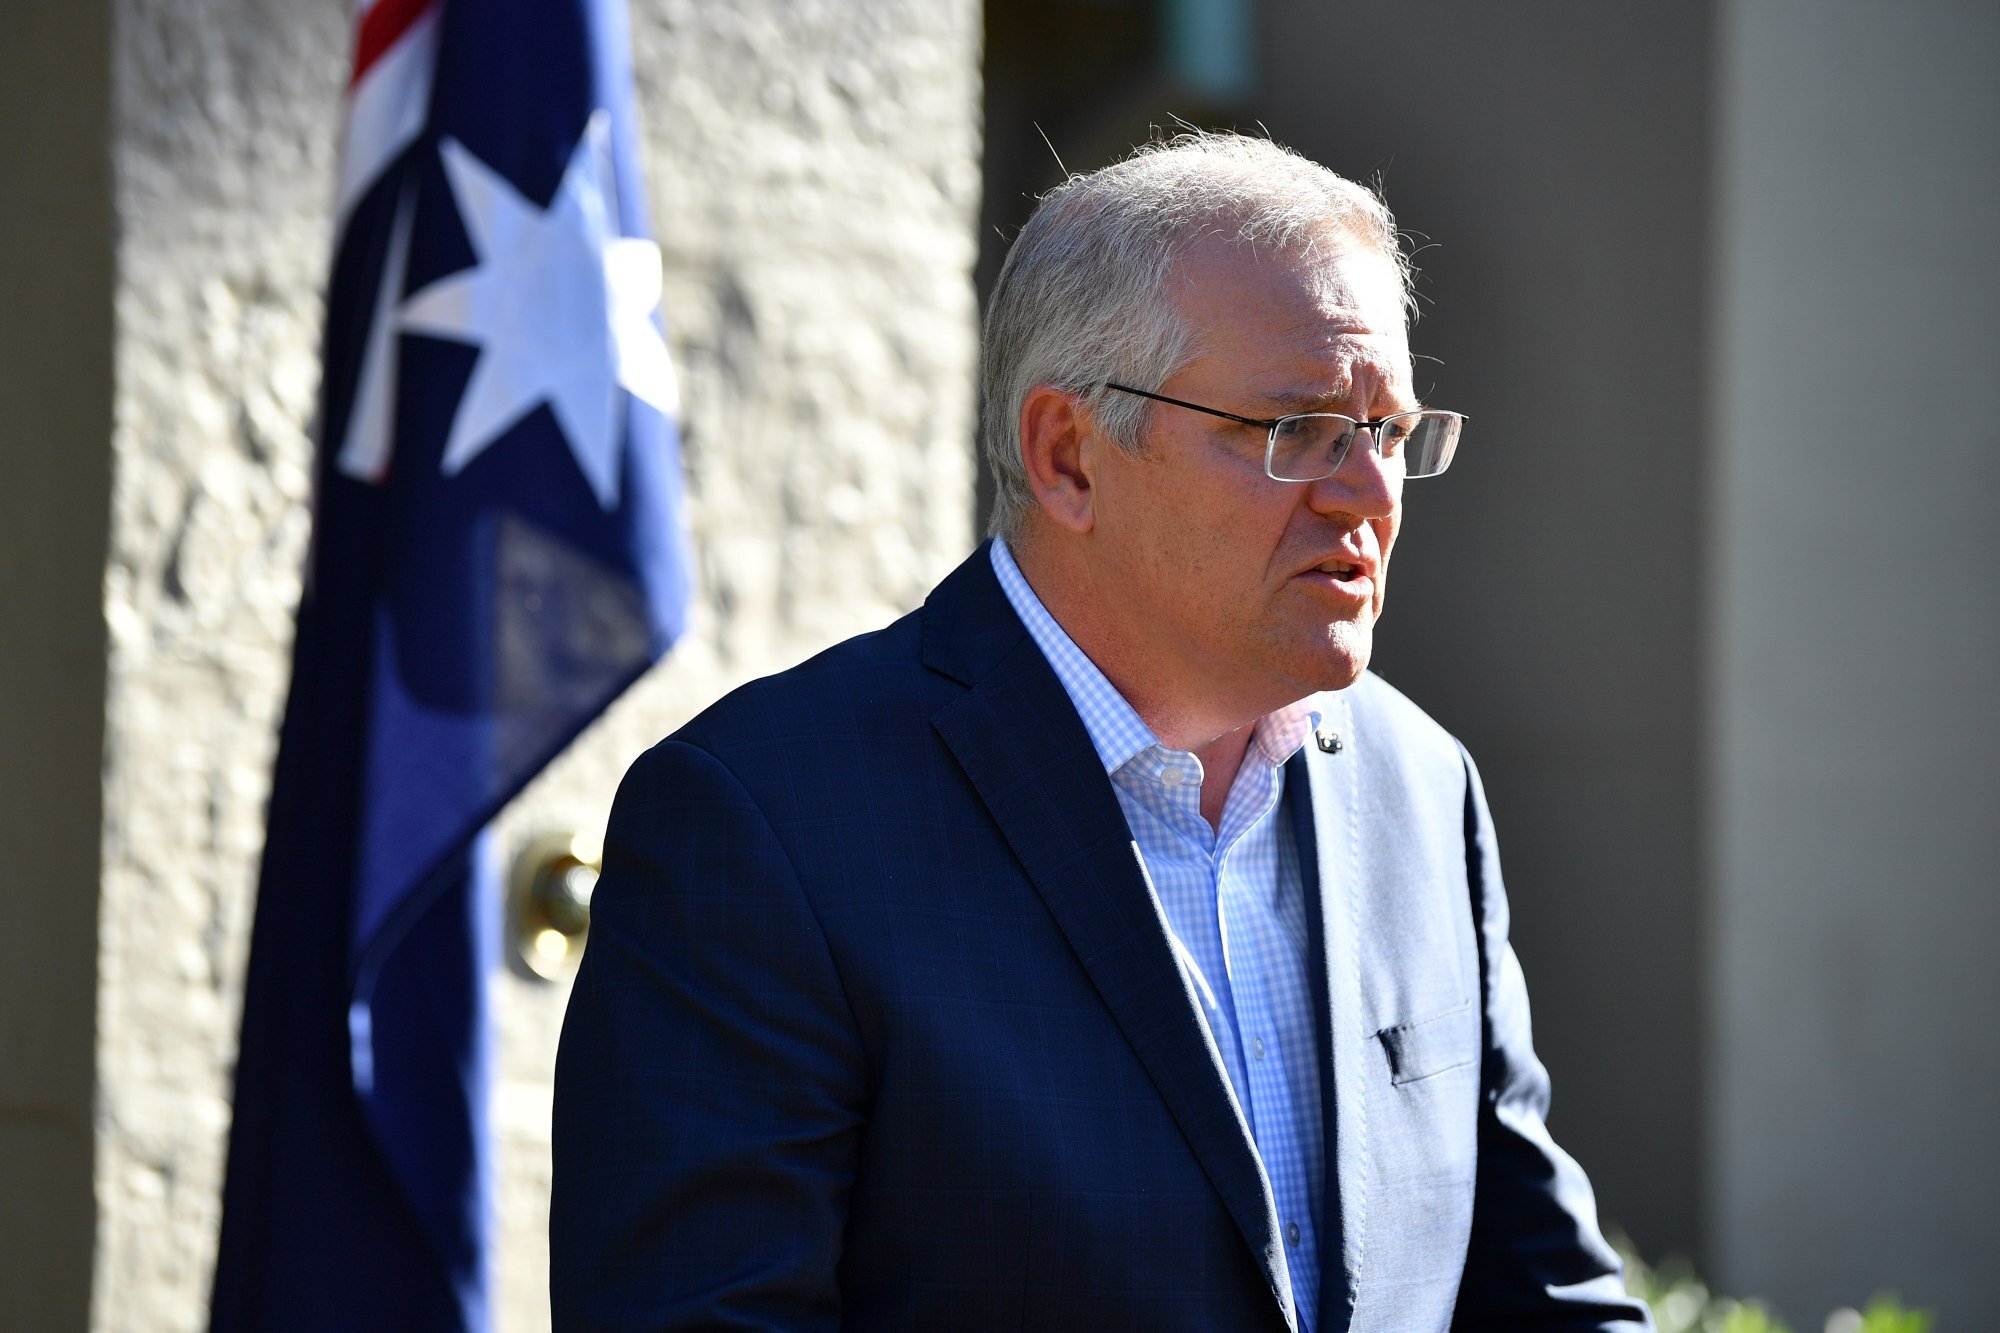 Australian Prime Minister Scott Morrison has endured his fair share of challenges and controversies – but is well paid for it. Photo: EPA-EFE